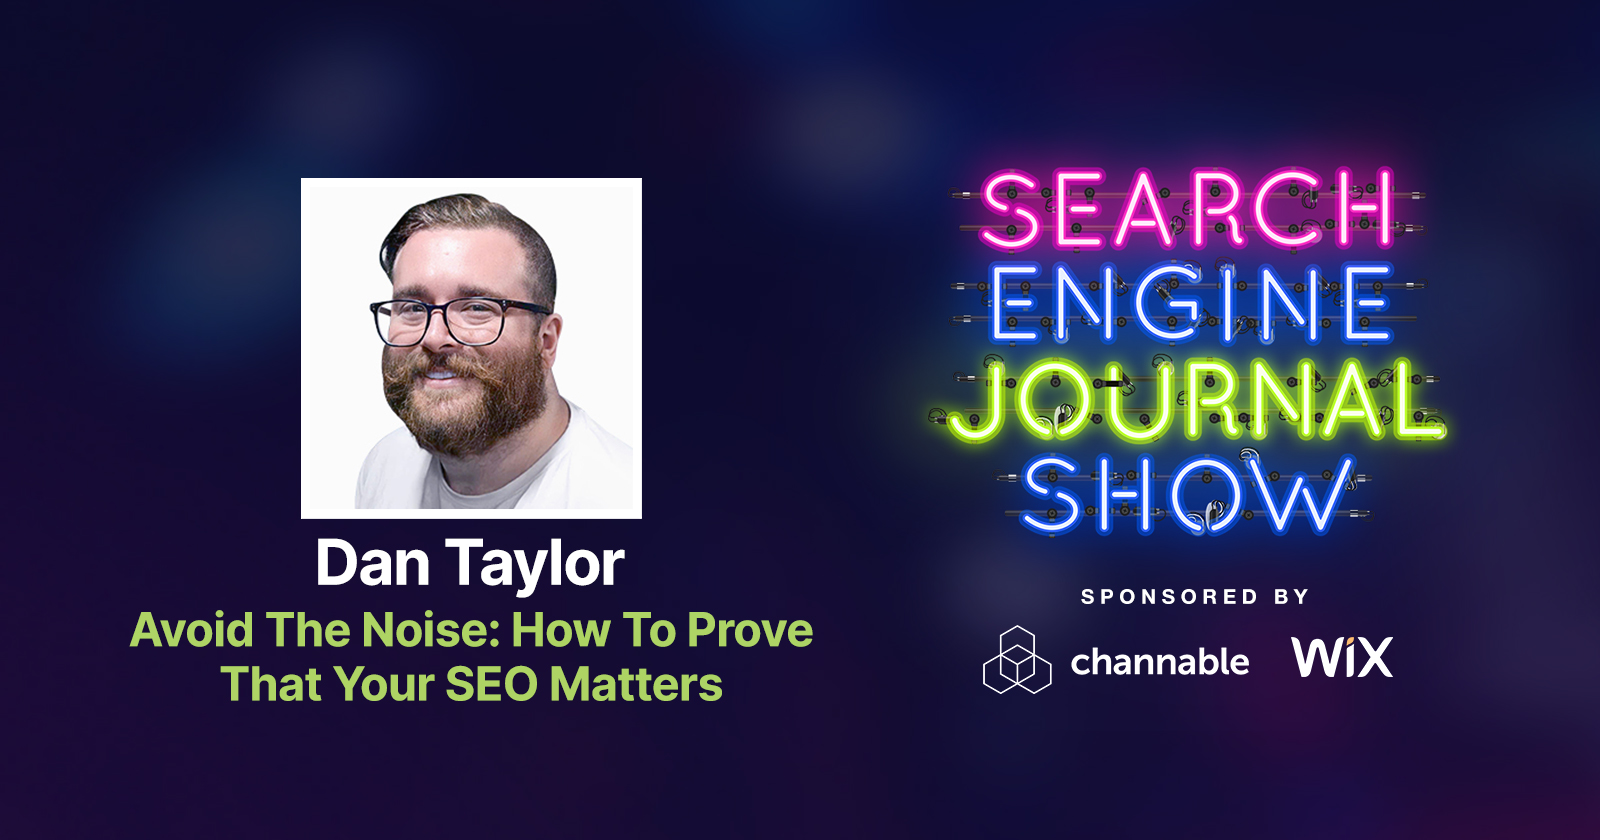 Avoid The Noise: How To Prove That Your SEO Matters